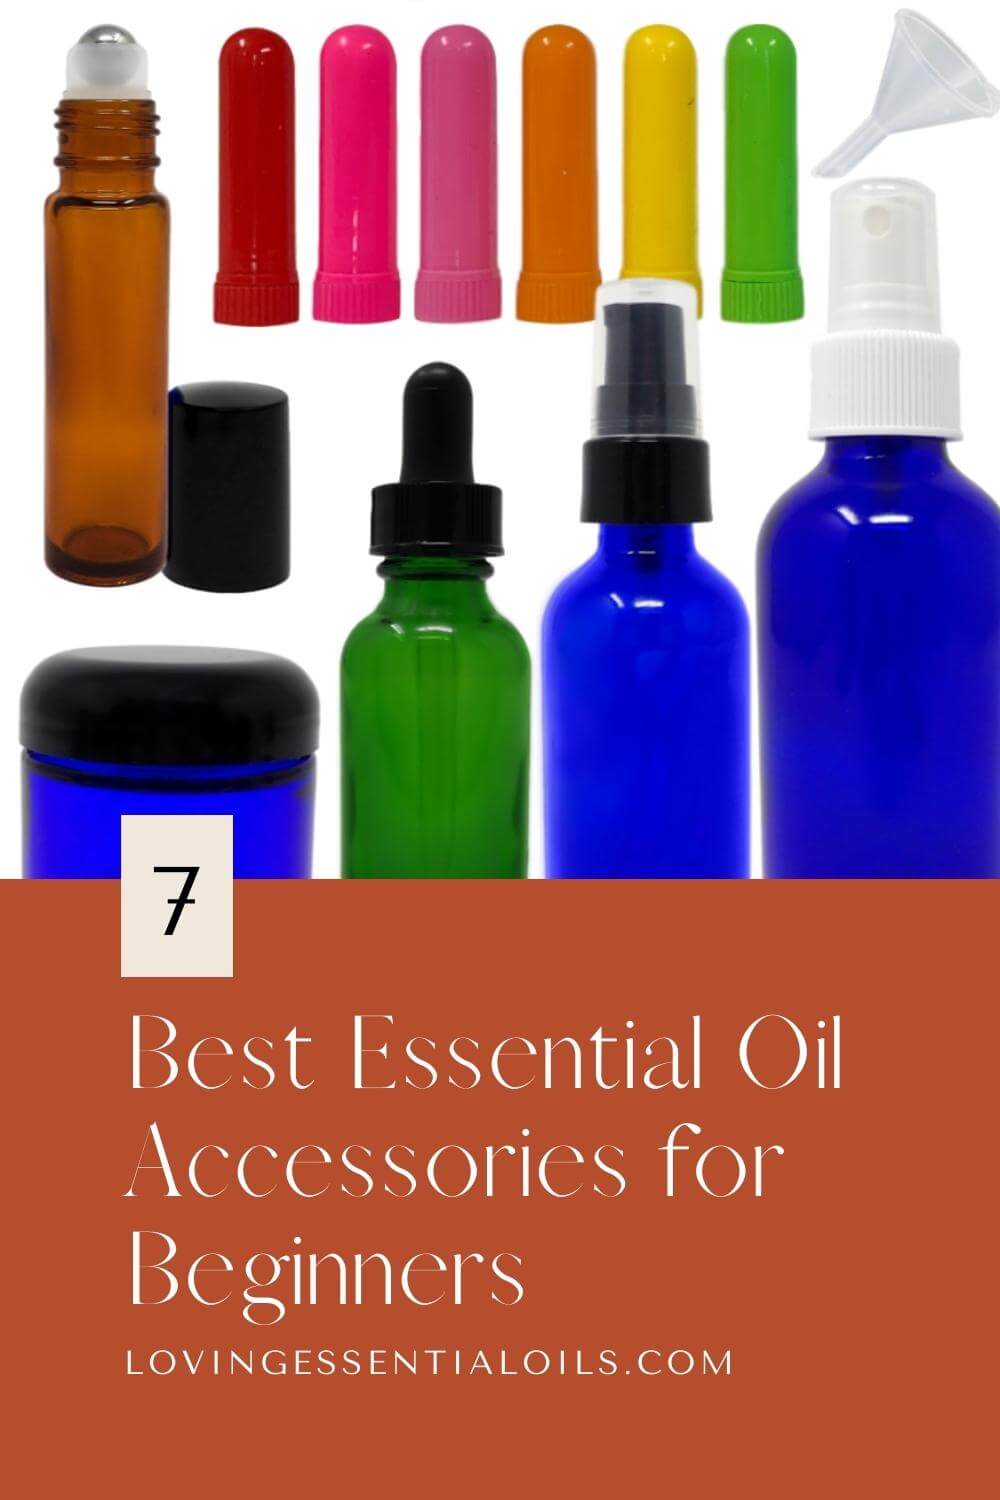 Best Essential Oil Accessories by Loving Essential Oils